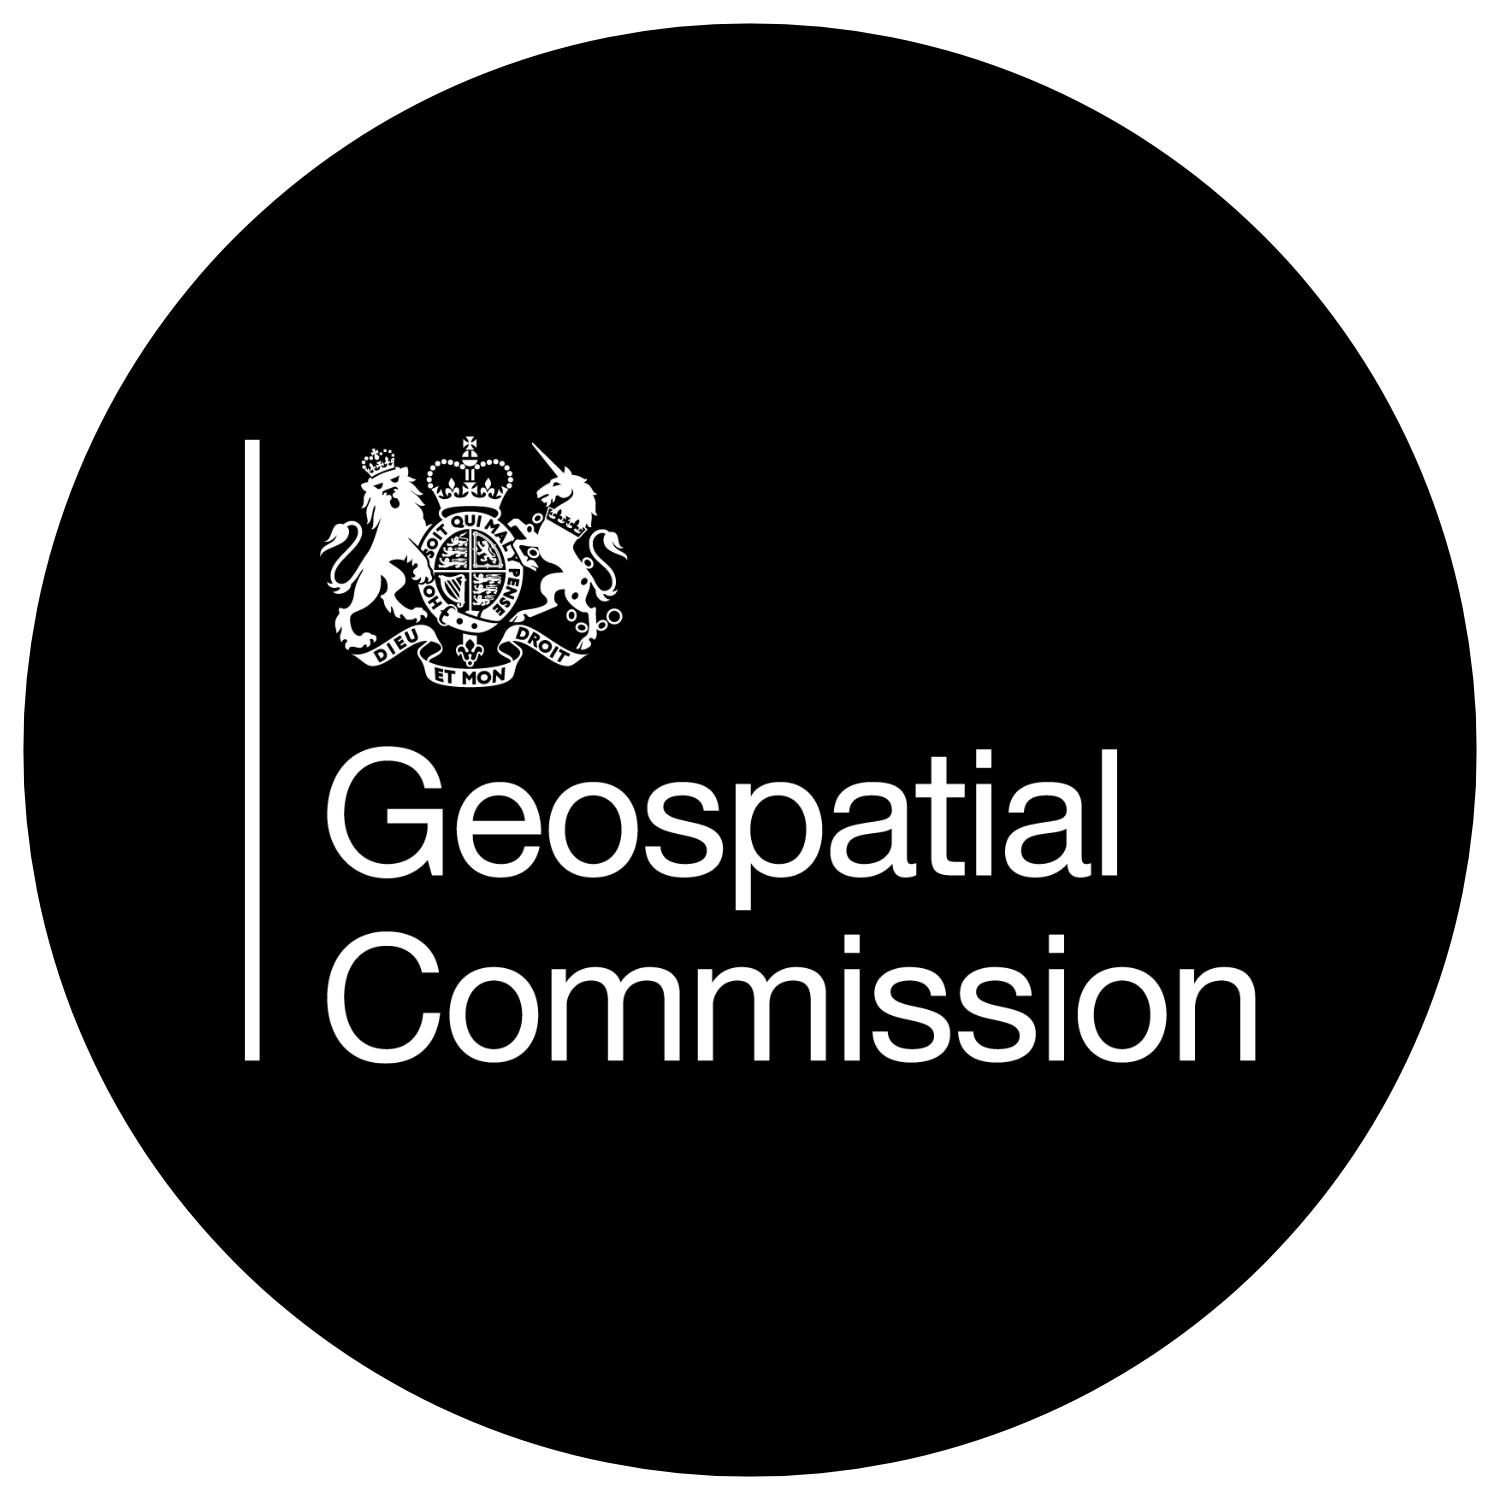 The Geospatial Commission